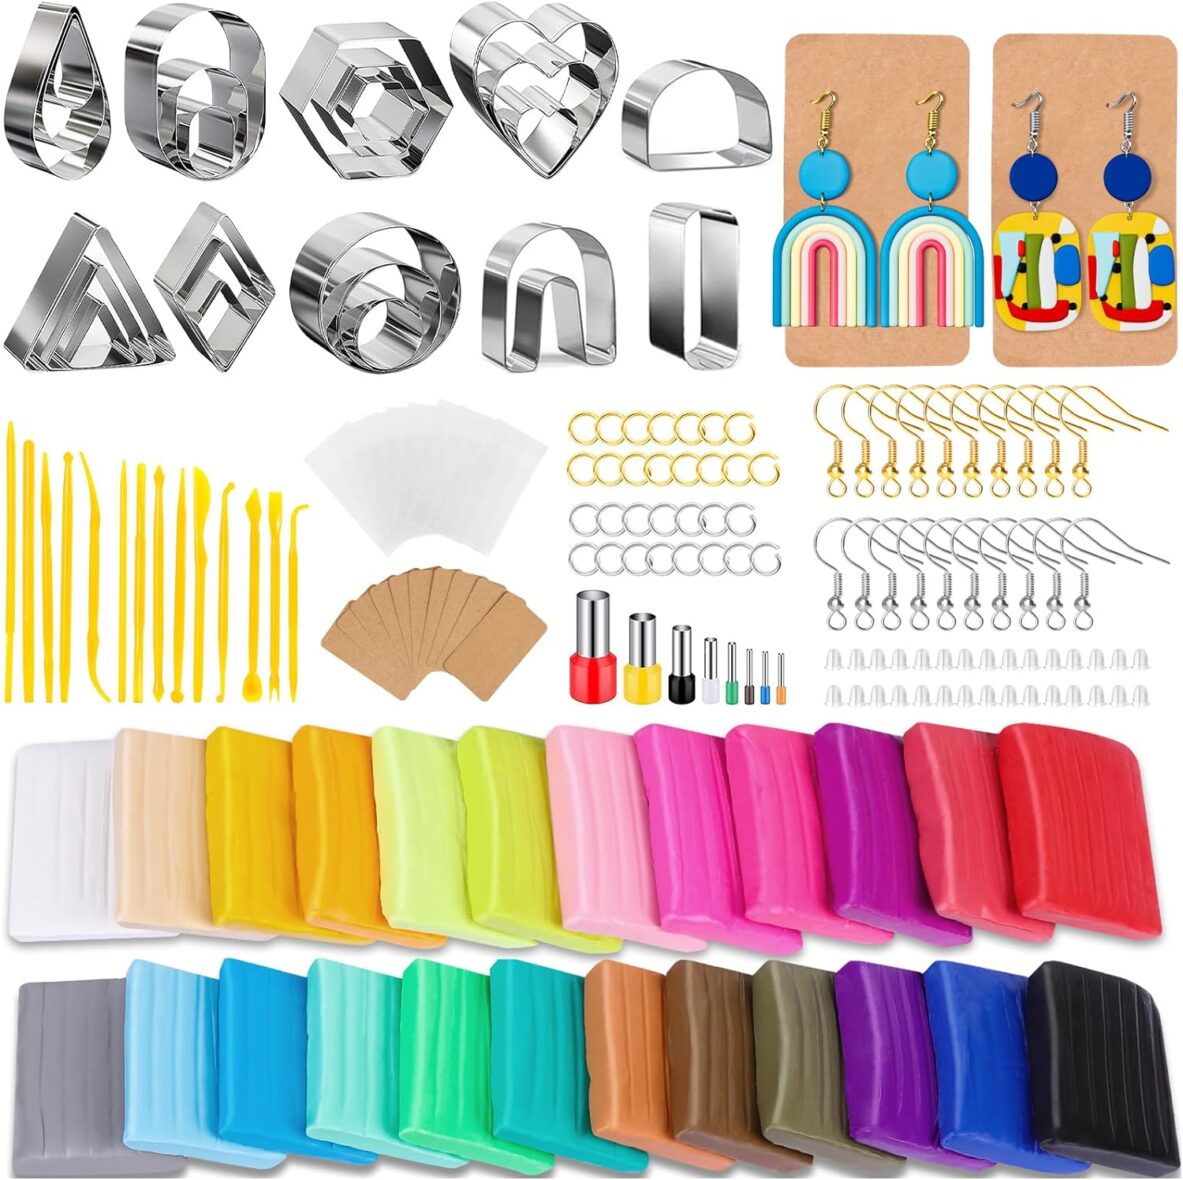 Polymer Clay Earrings Making Kit with 32pcs Polymer Clay Cutters, 24pcs Oven Bake Clay, 30 Set Earring Rings&Hooks, Modeling Clay Jewelry Making Kit for Beginners